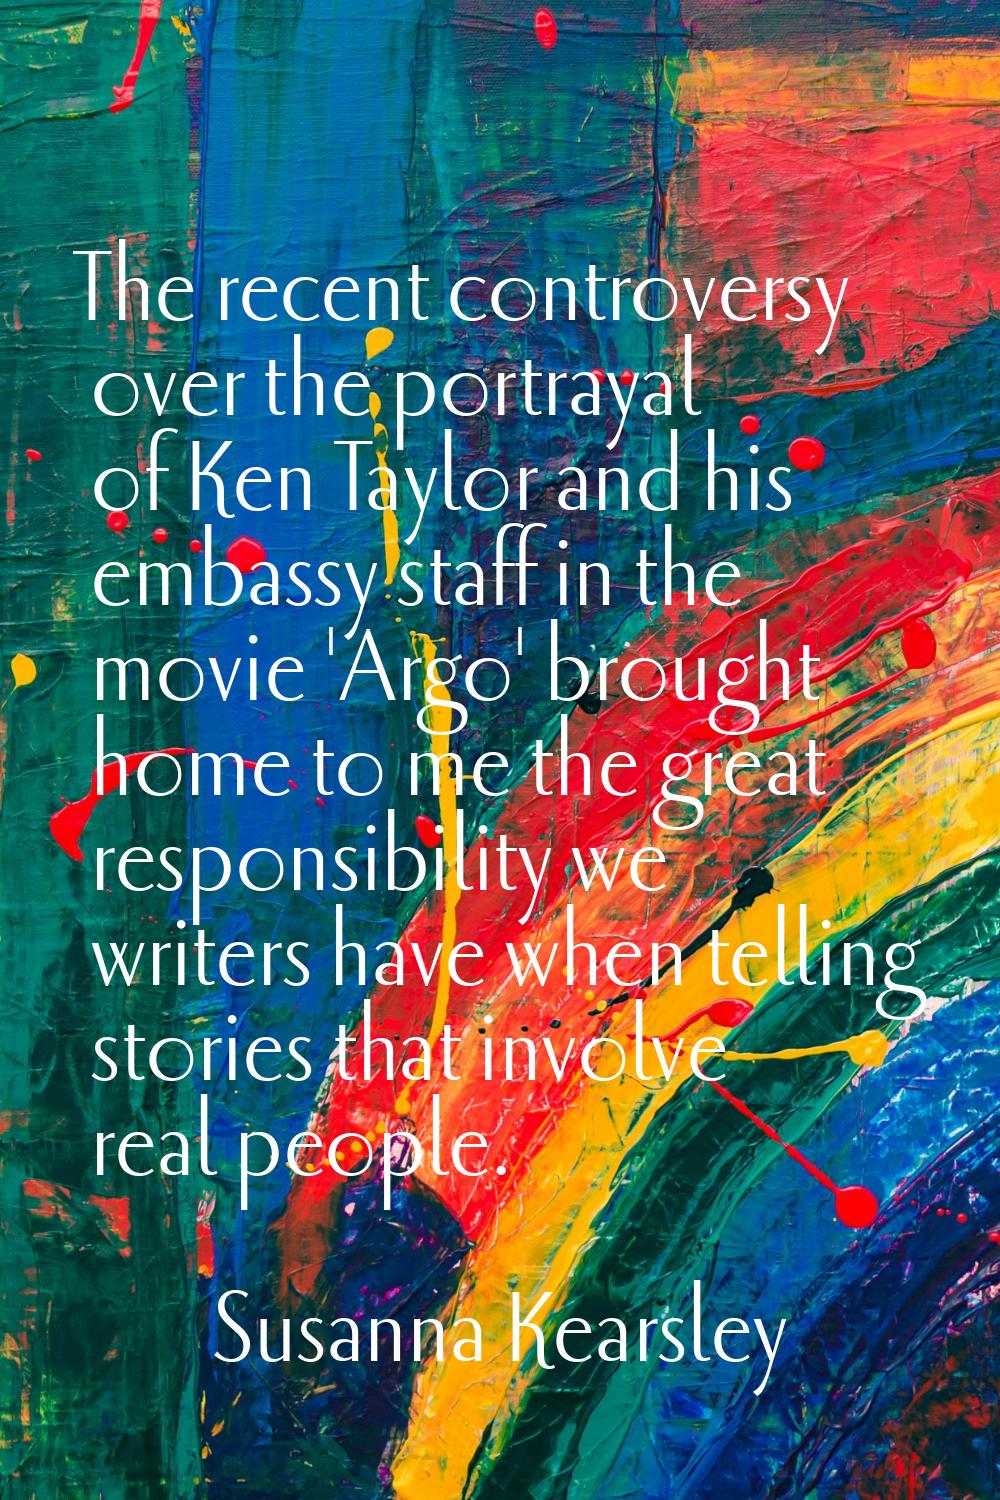 The recent controversy over the portrayal of Ken Taylor and his embassy staff in the movie 'Argo' b